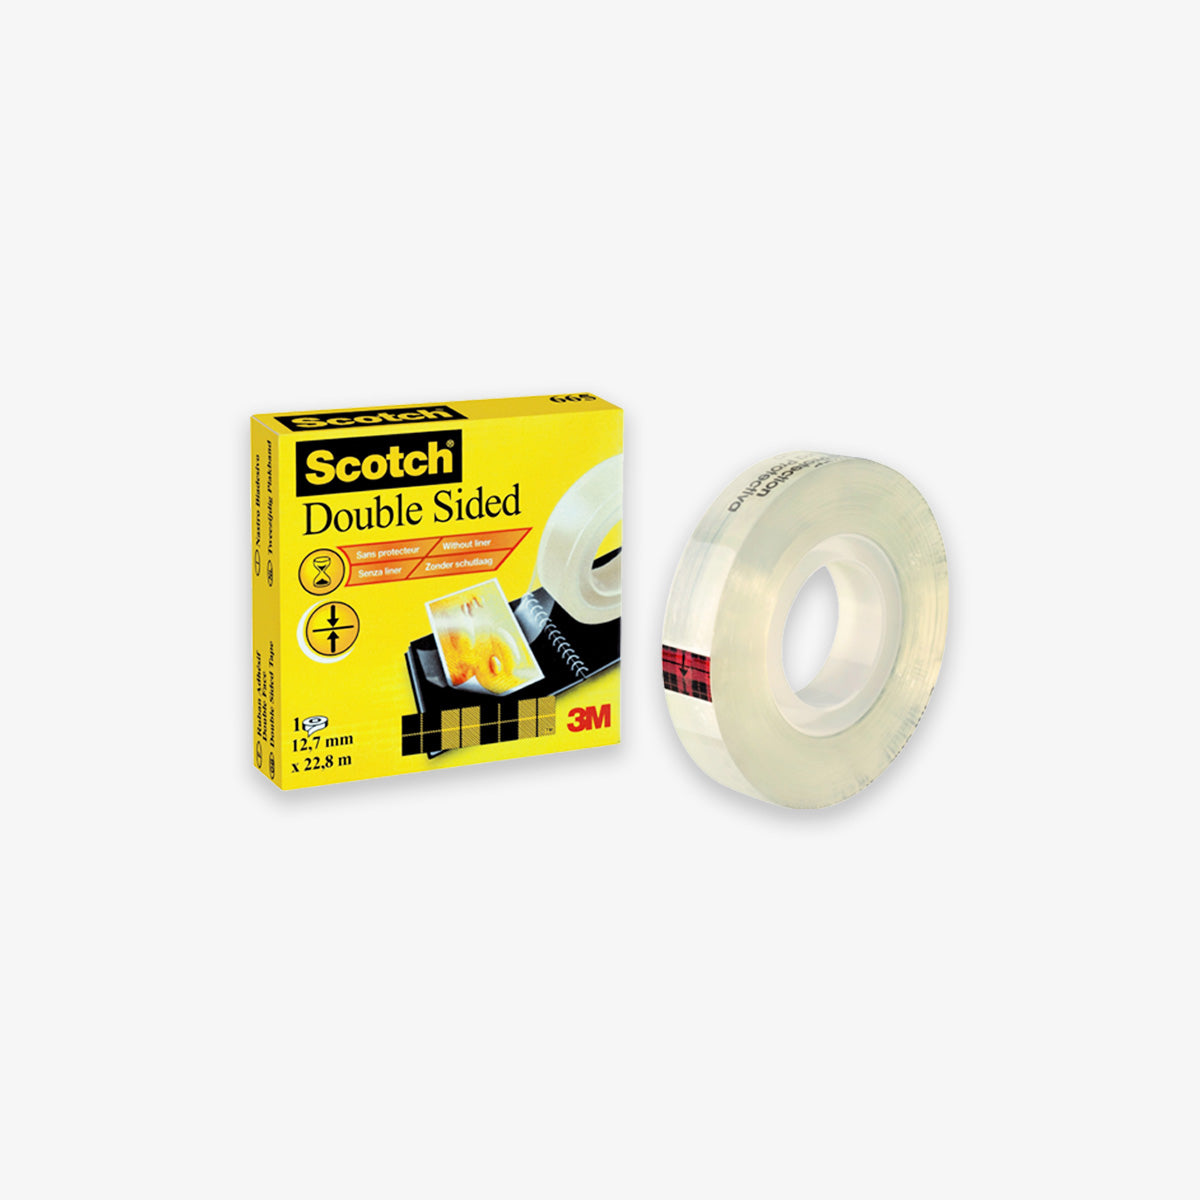 DOUBLE-SIDED SCOTCH TAPE